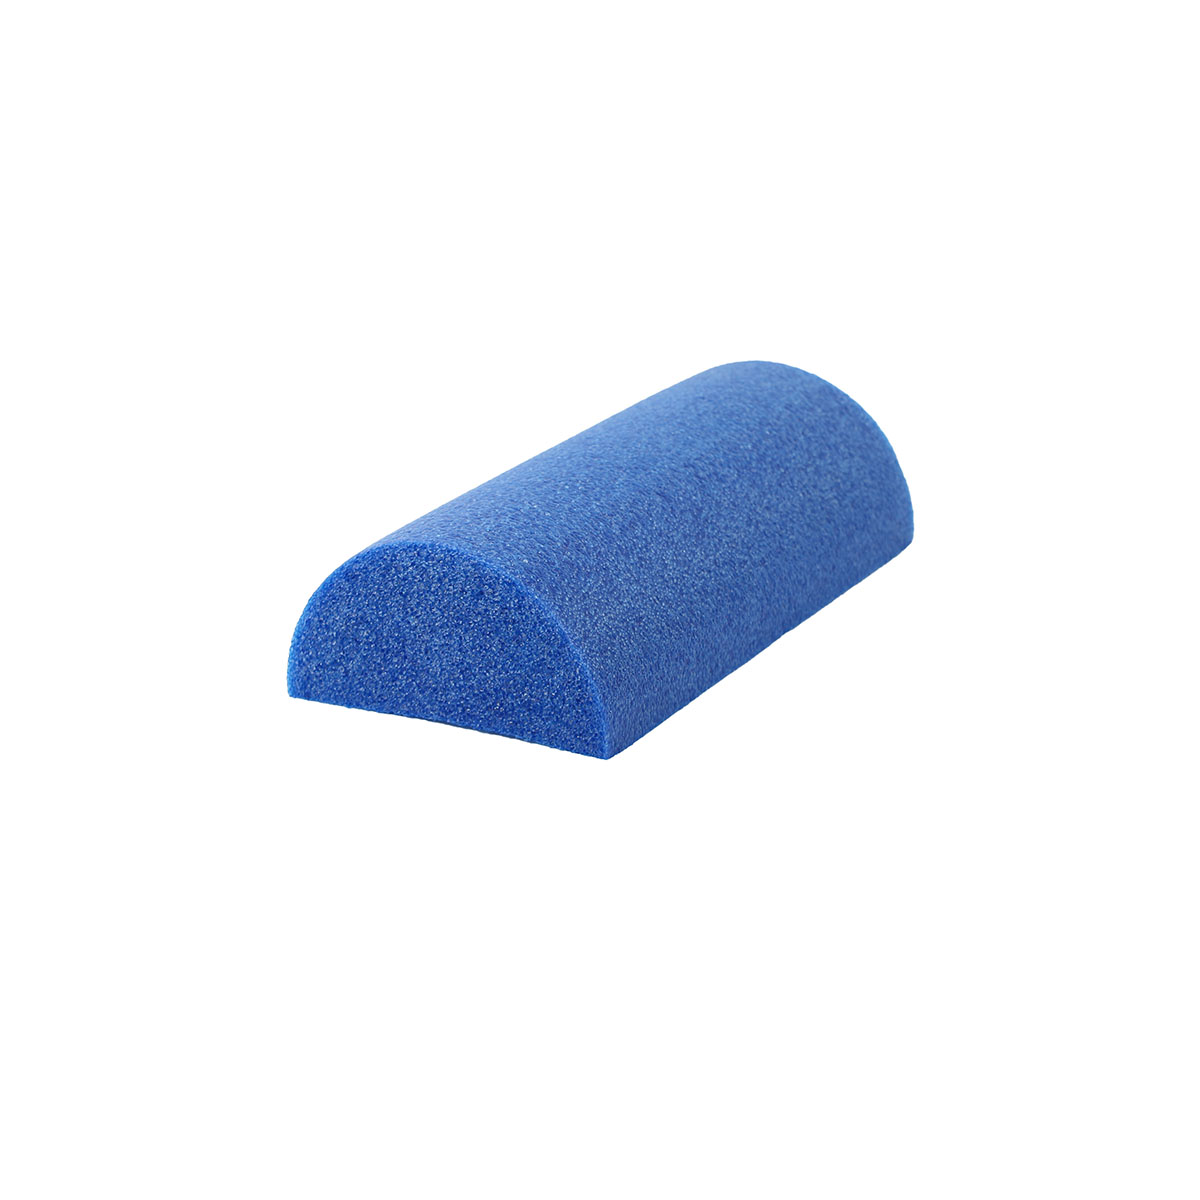 CanDo Blue PE Foam Rollers for Fitness, Exercise Muscle Restoration, Massage Therapy, Sport Recovery and Physical Therapy for Homes, Clinics, and Gyms 6 " x 12" Half-Round - image 1 of 2